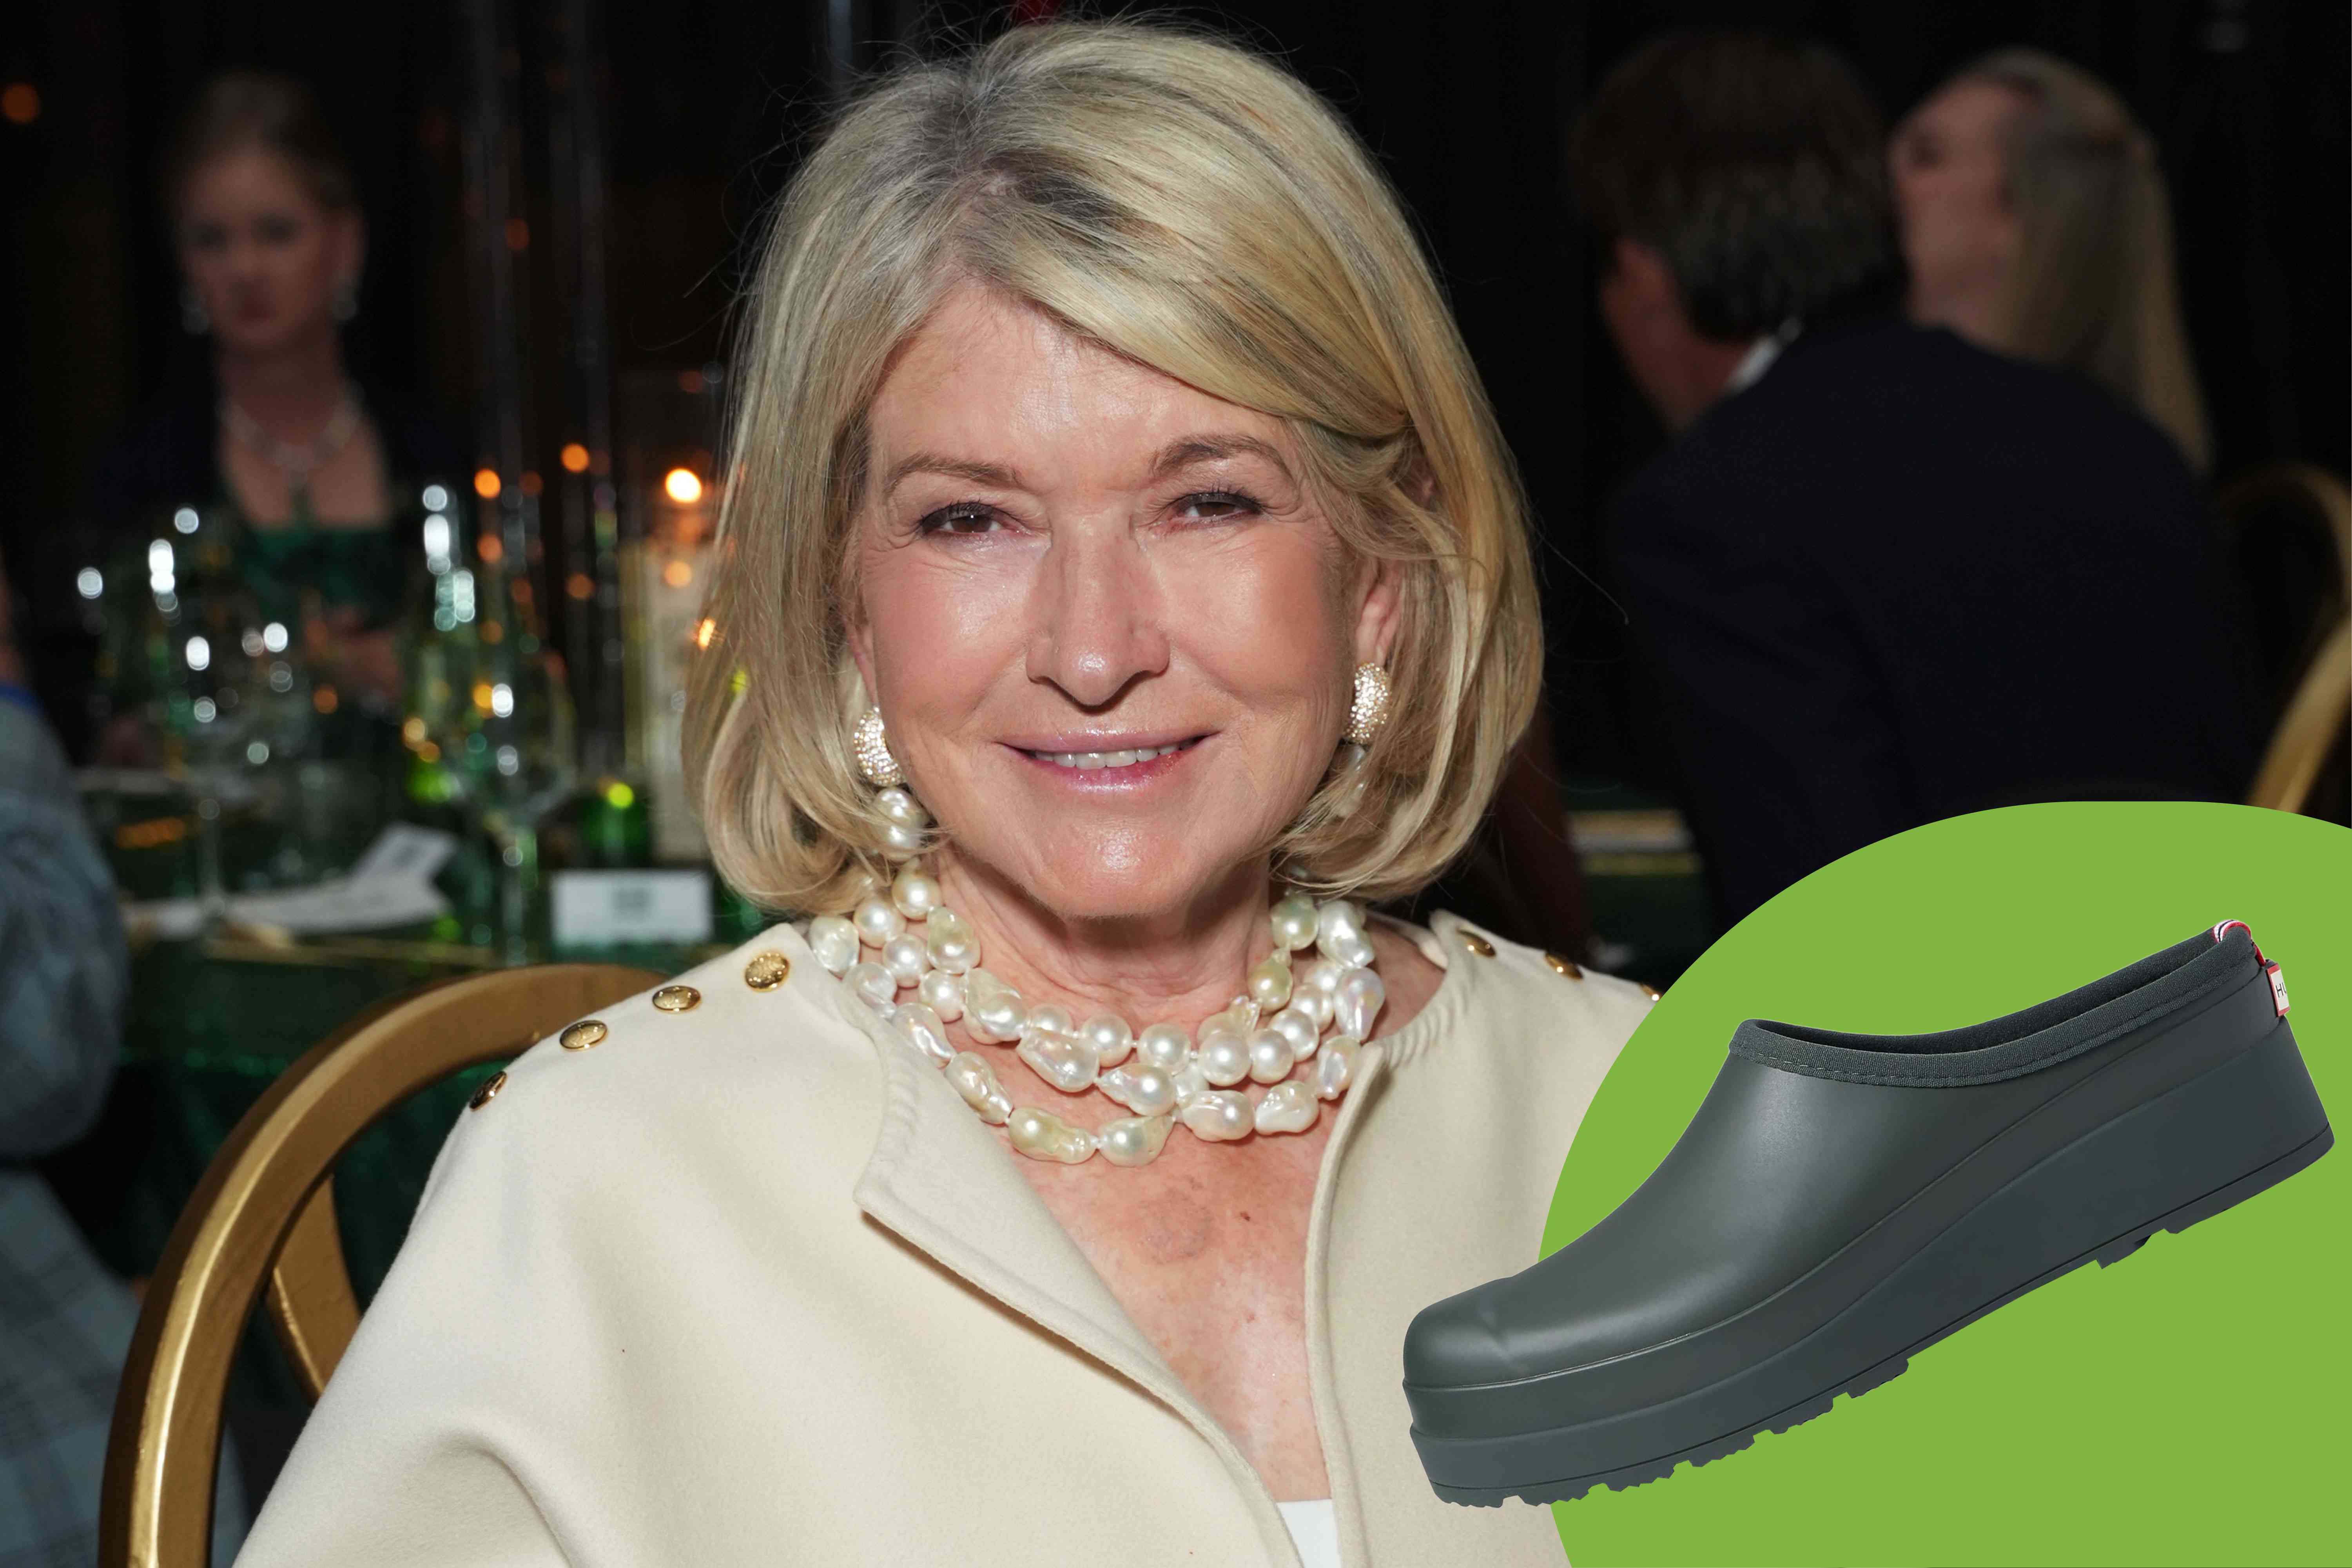 Martha Stewart’s Gardening Outfit Included Practical Clogs That Look Just Like This $23 Pair at Amazon